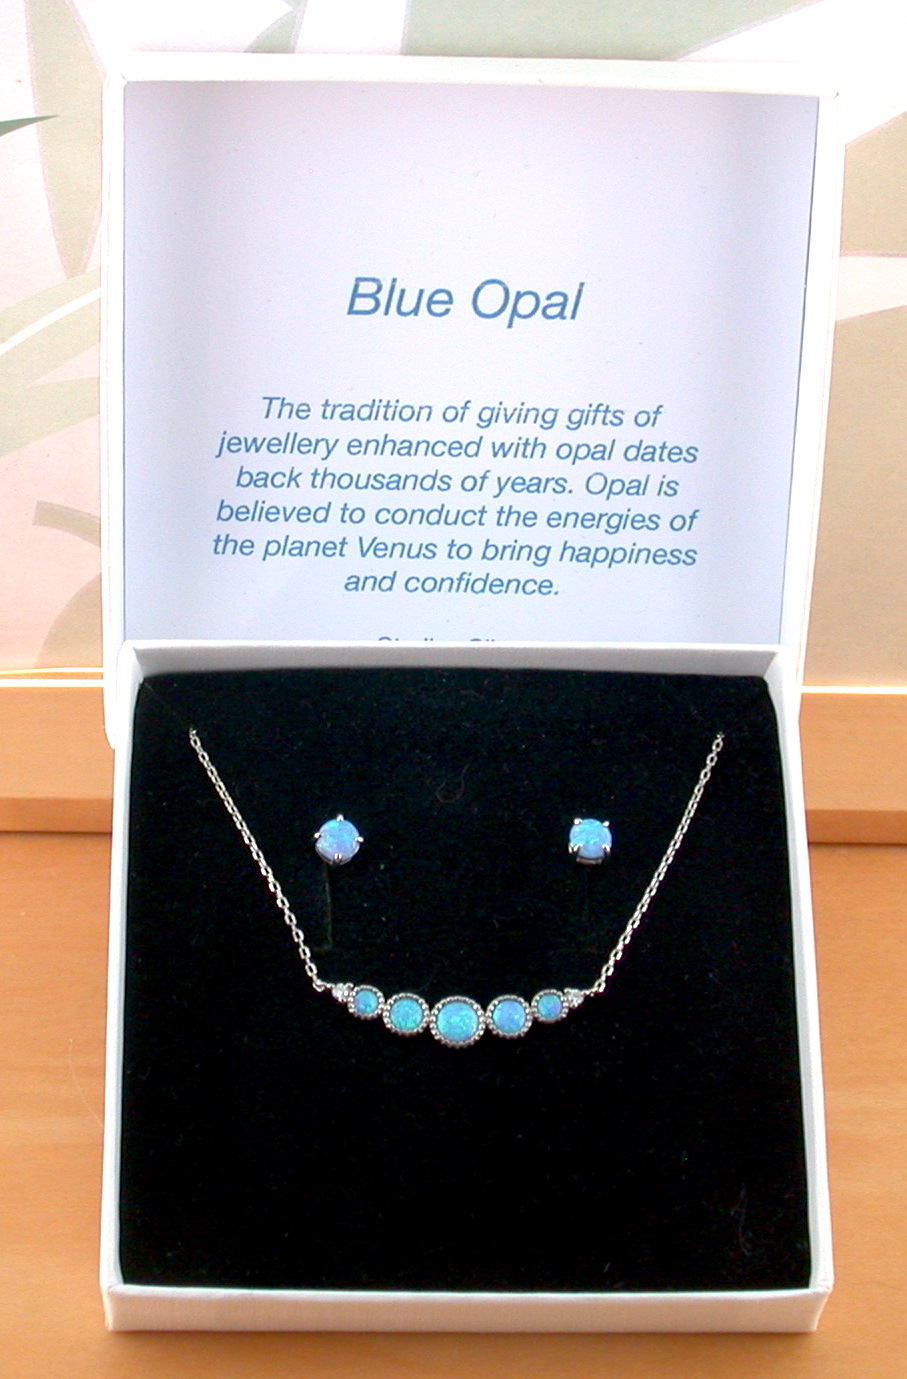 blue opal necklace and earrings